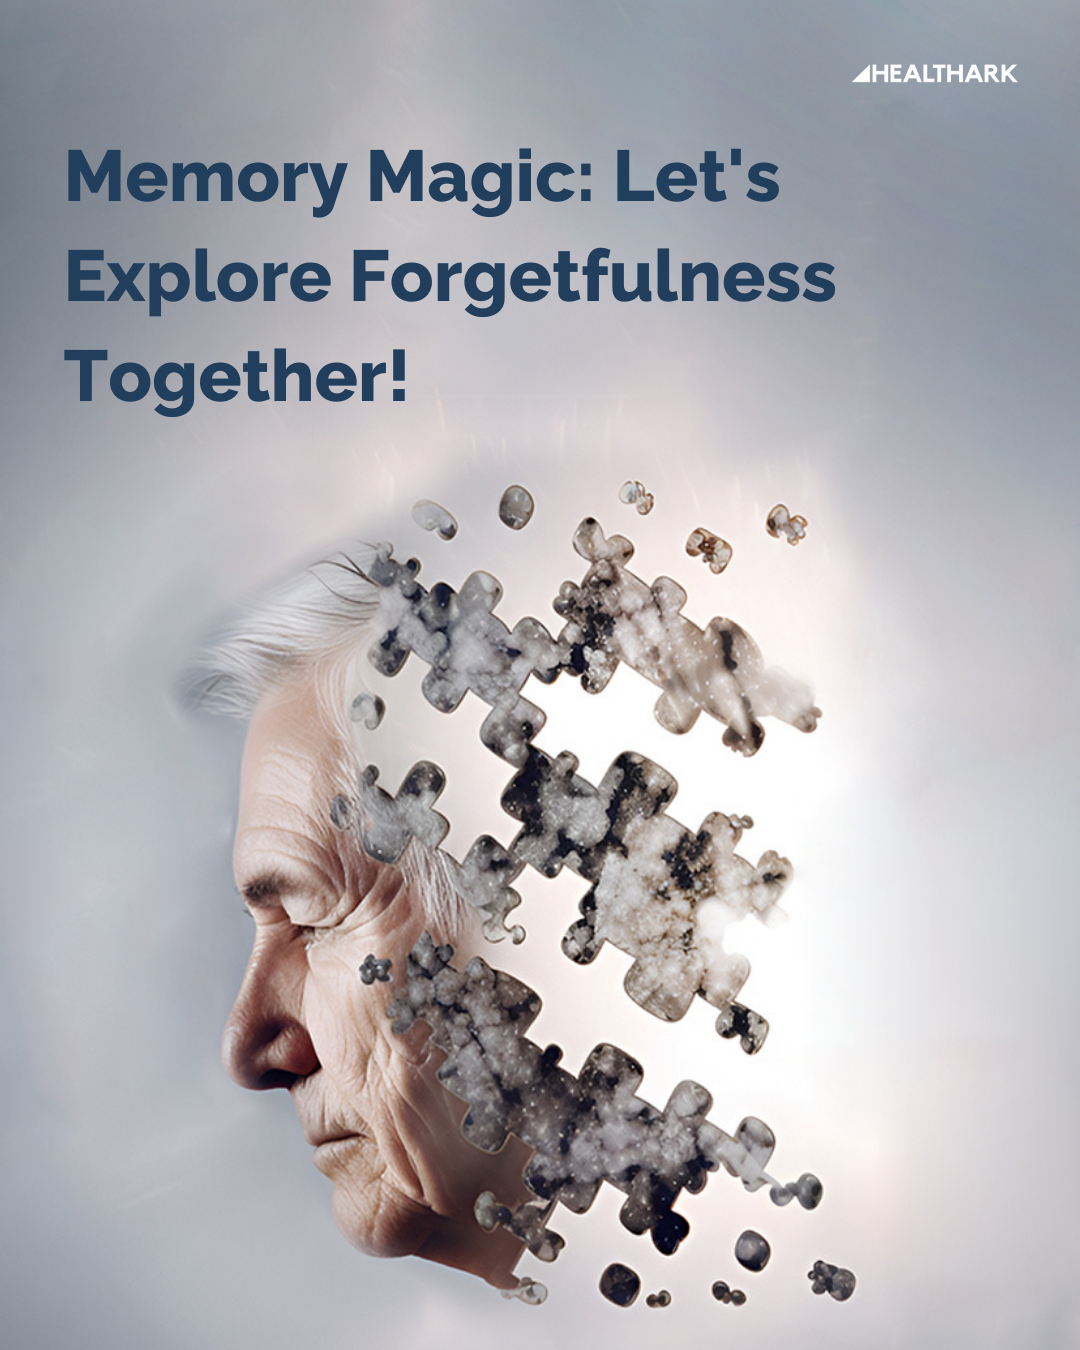 Memory Magic: Let’s Explore Forgetfulness Together!